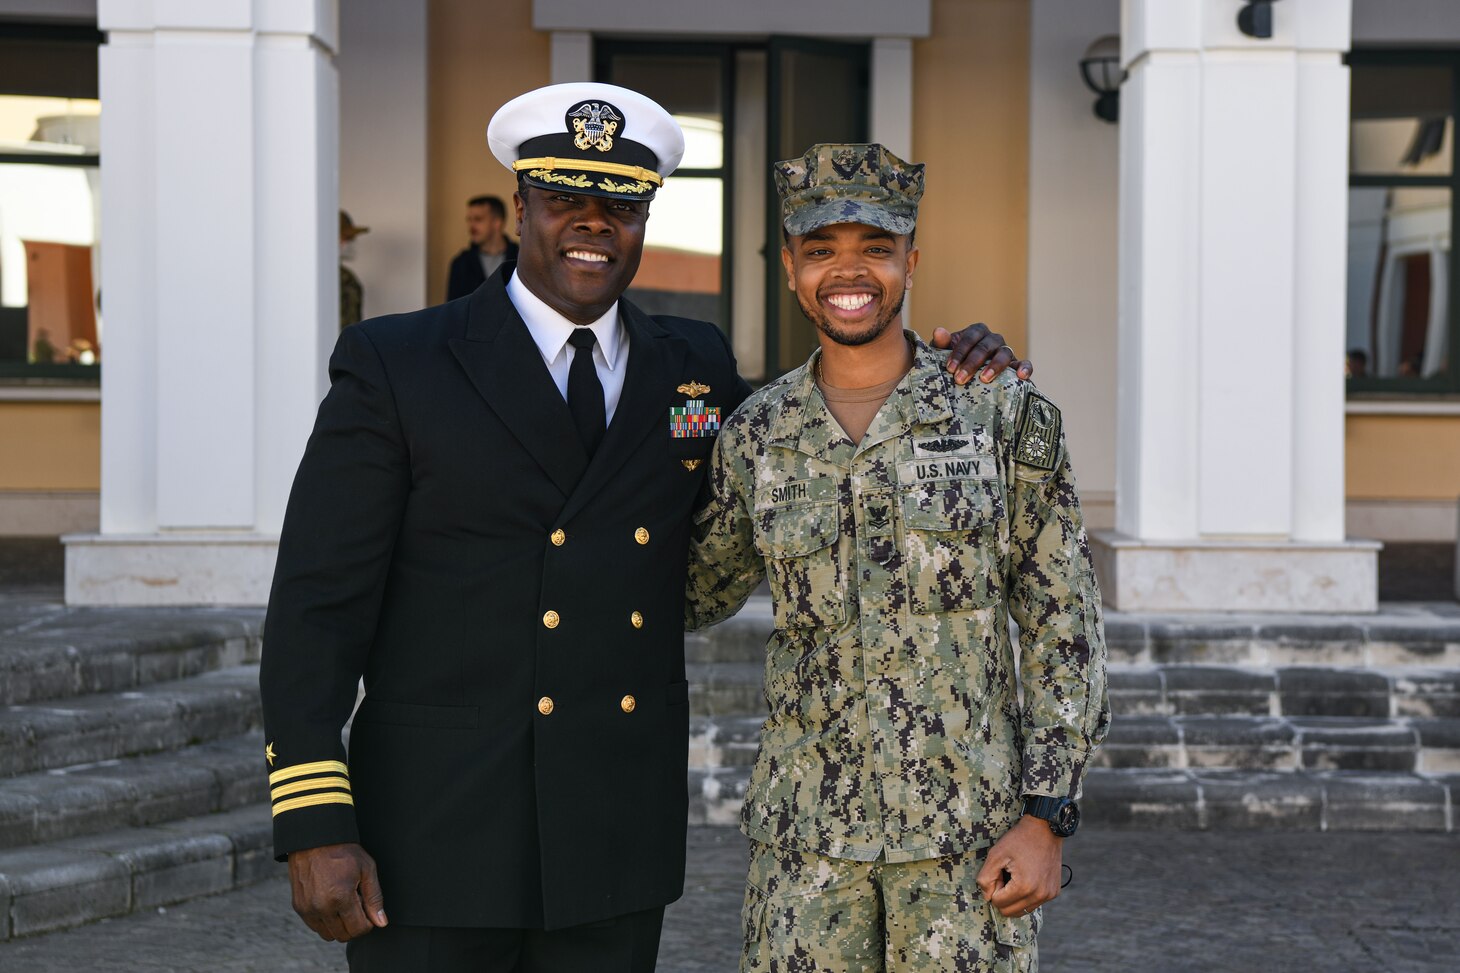 Cmdr. Hasan AbdulMutakallim, left, and Yeoman 2nd Class Danny Smith, right, pose for a photo during a Black History Month event at Naval Support Activity Naples, Italy, Feb. 24, 2022.